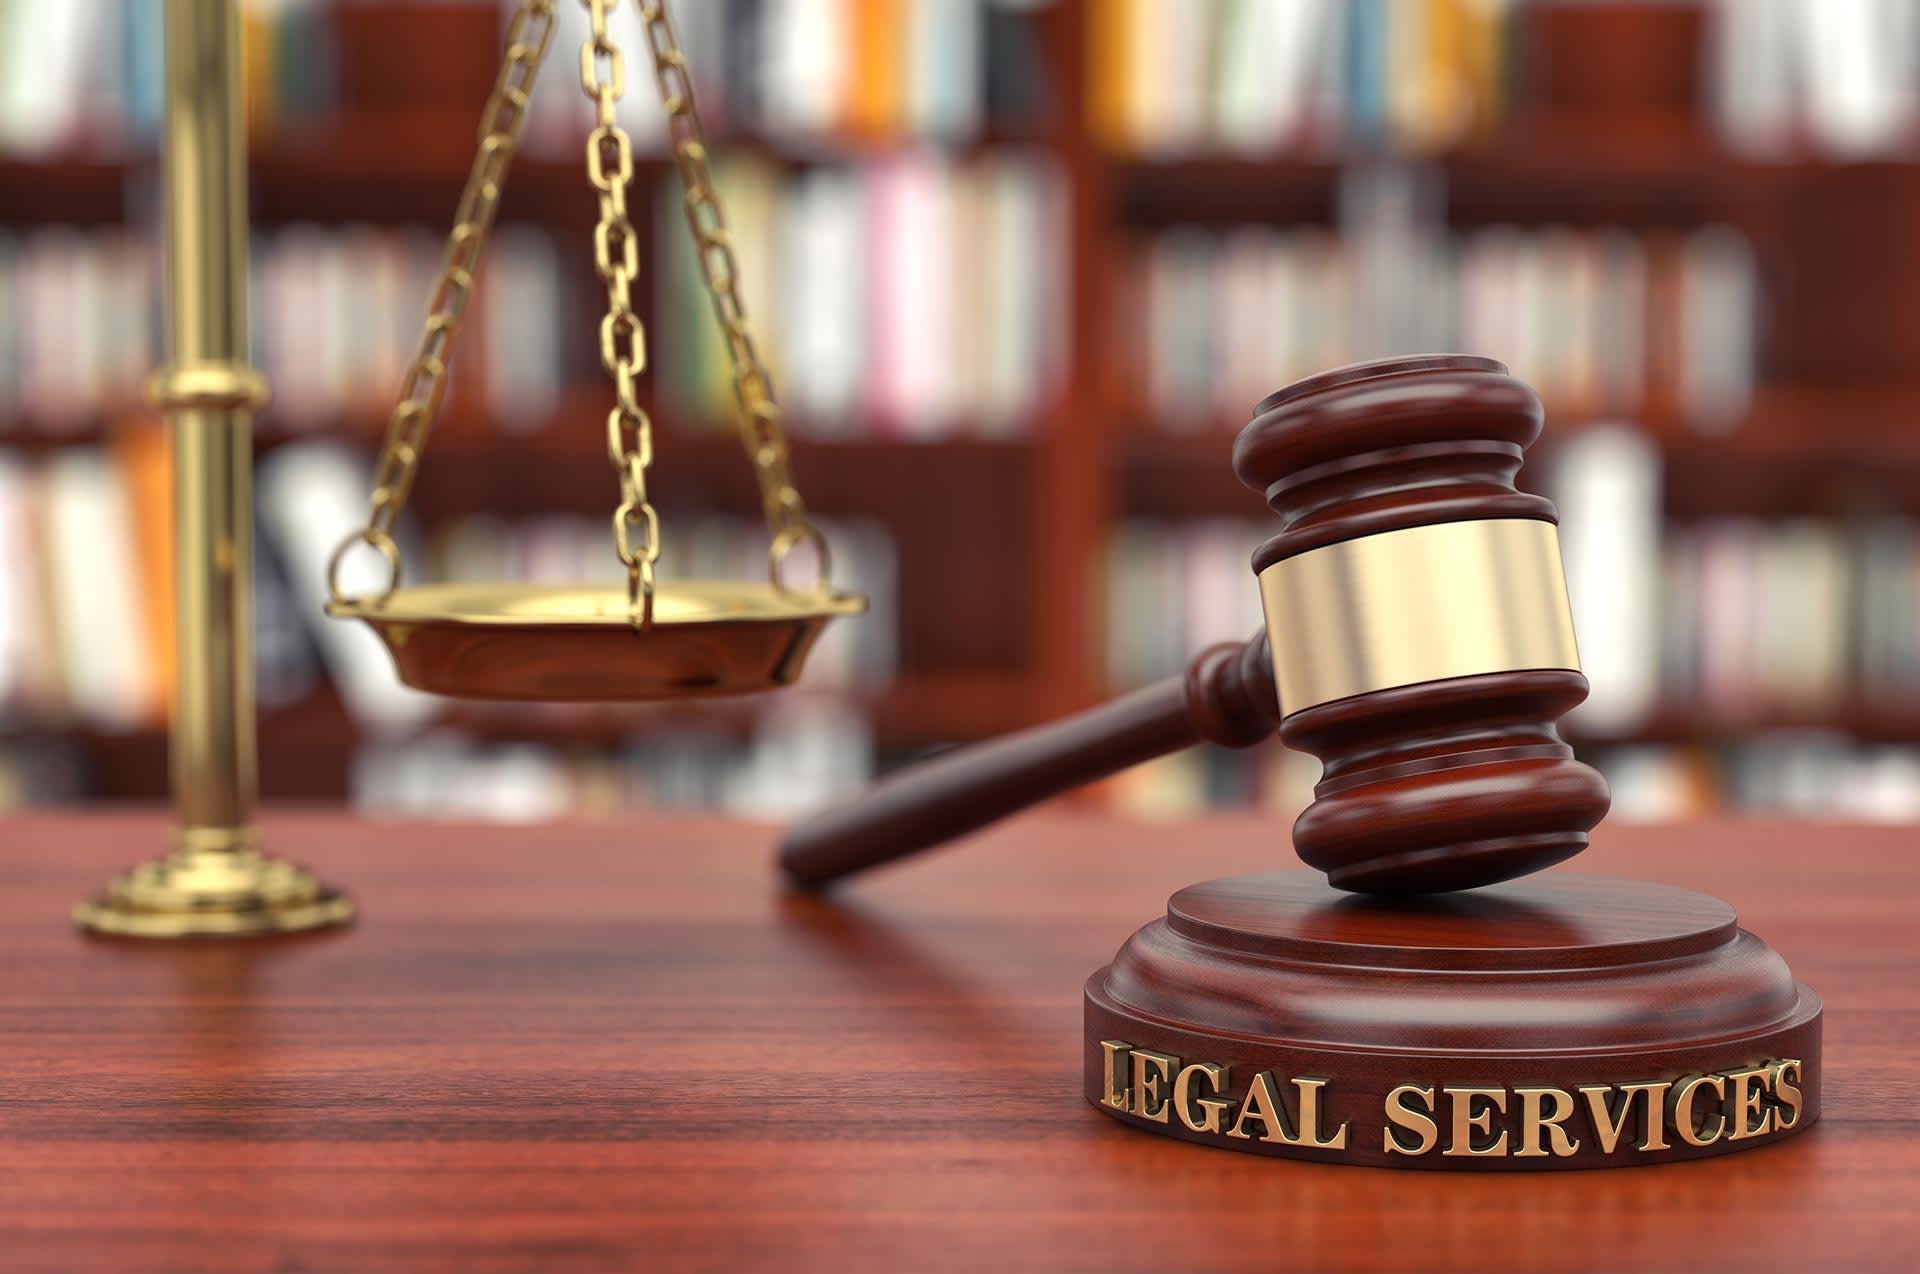 Civil Law Services in Costa Rica from the USA